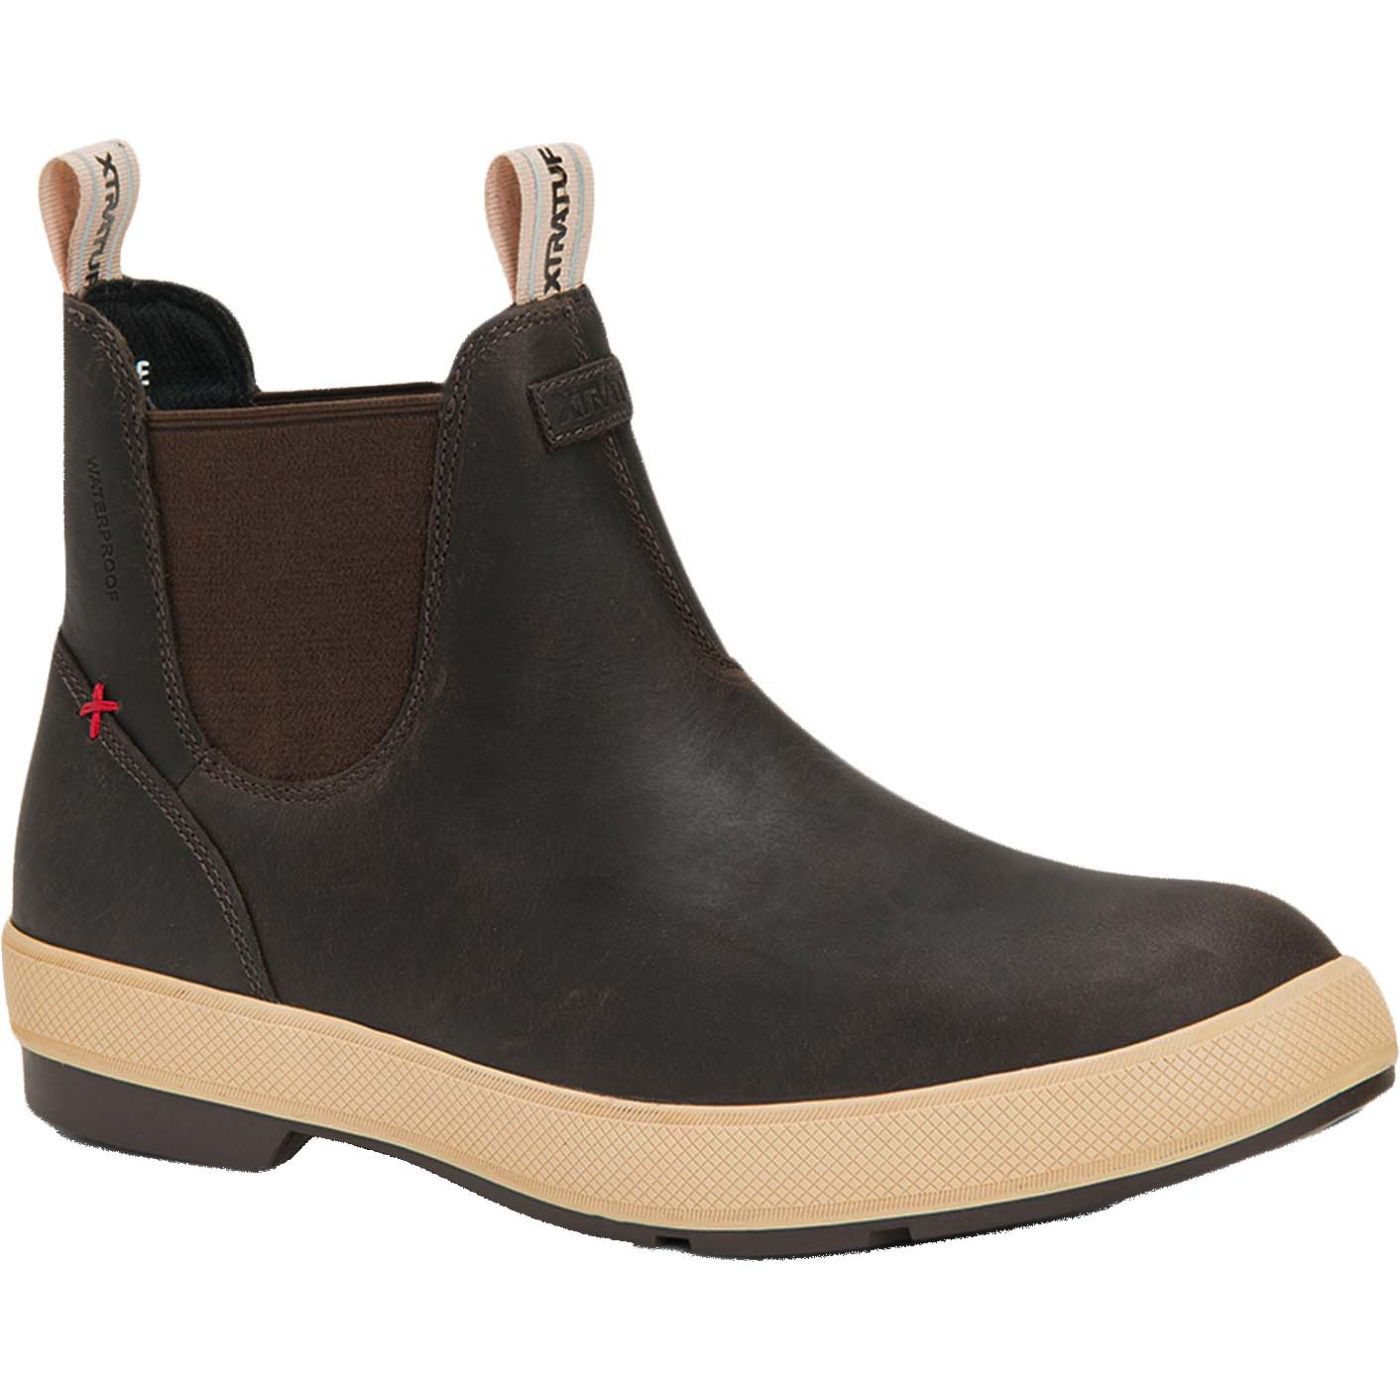 Xtratuf Legacy Leather Chelsea Boots for Men - Brown - 12M